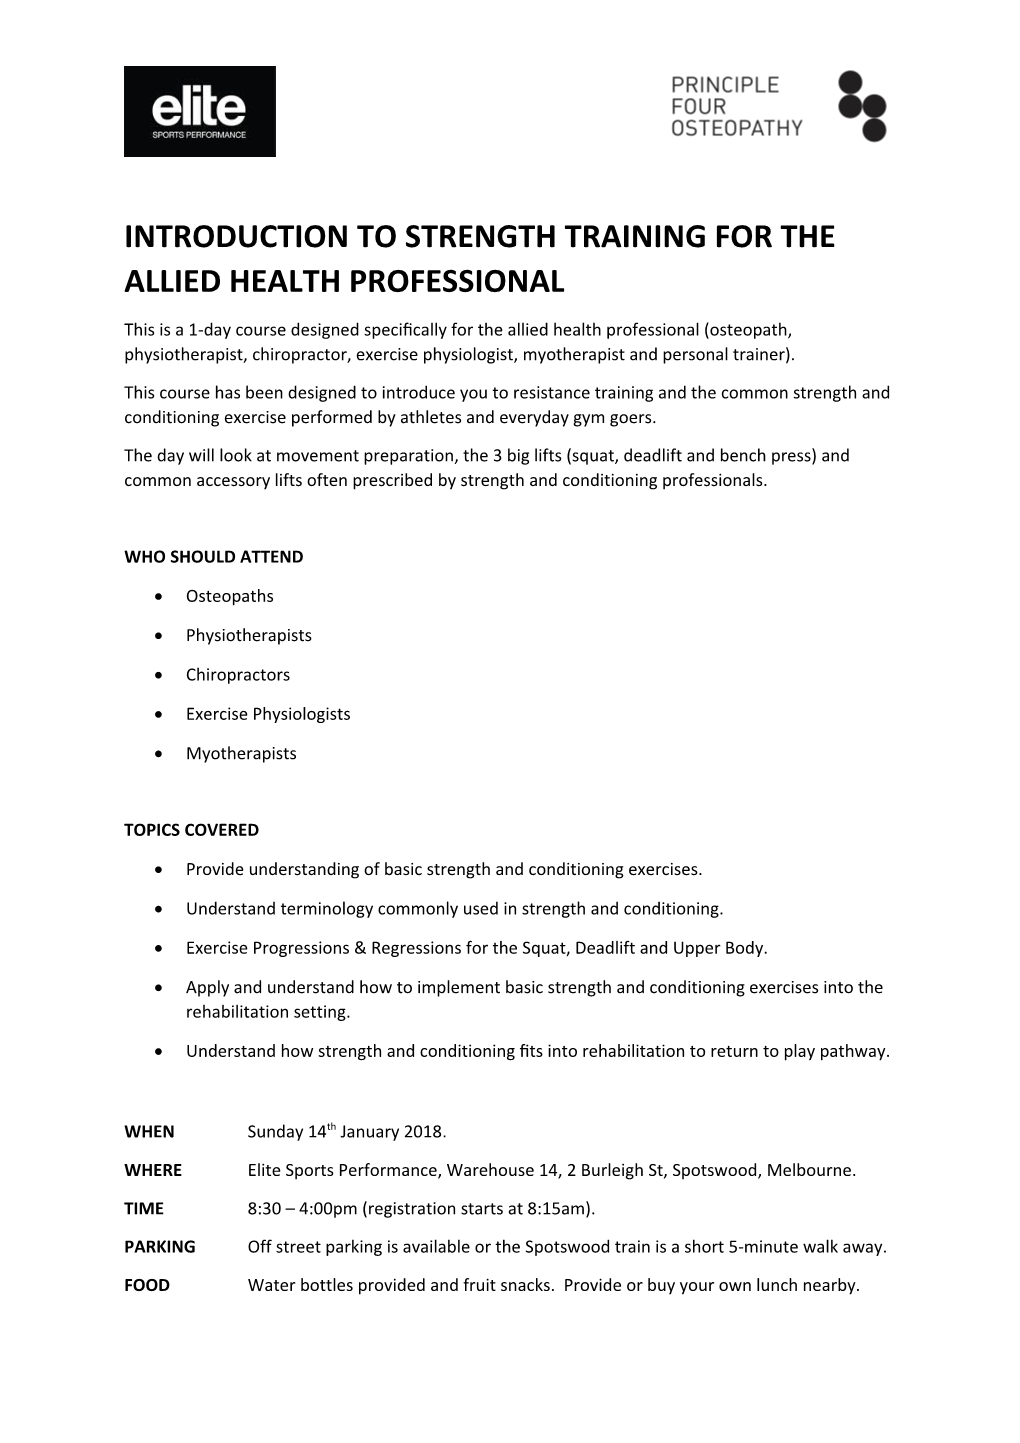 Introduction to Strength Training for the Allied Health Professional